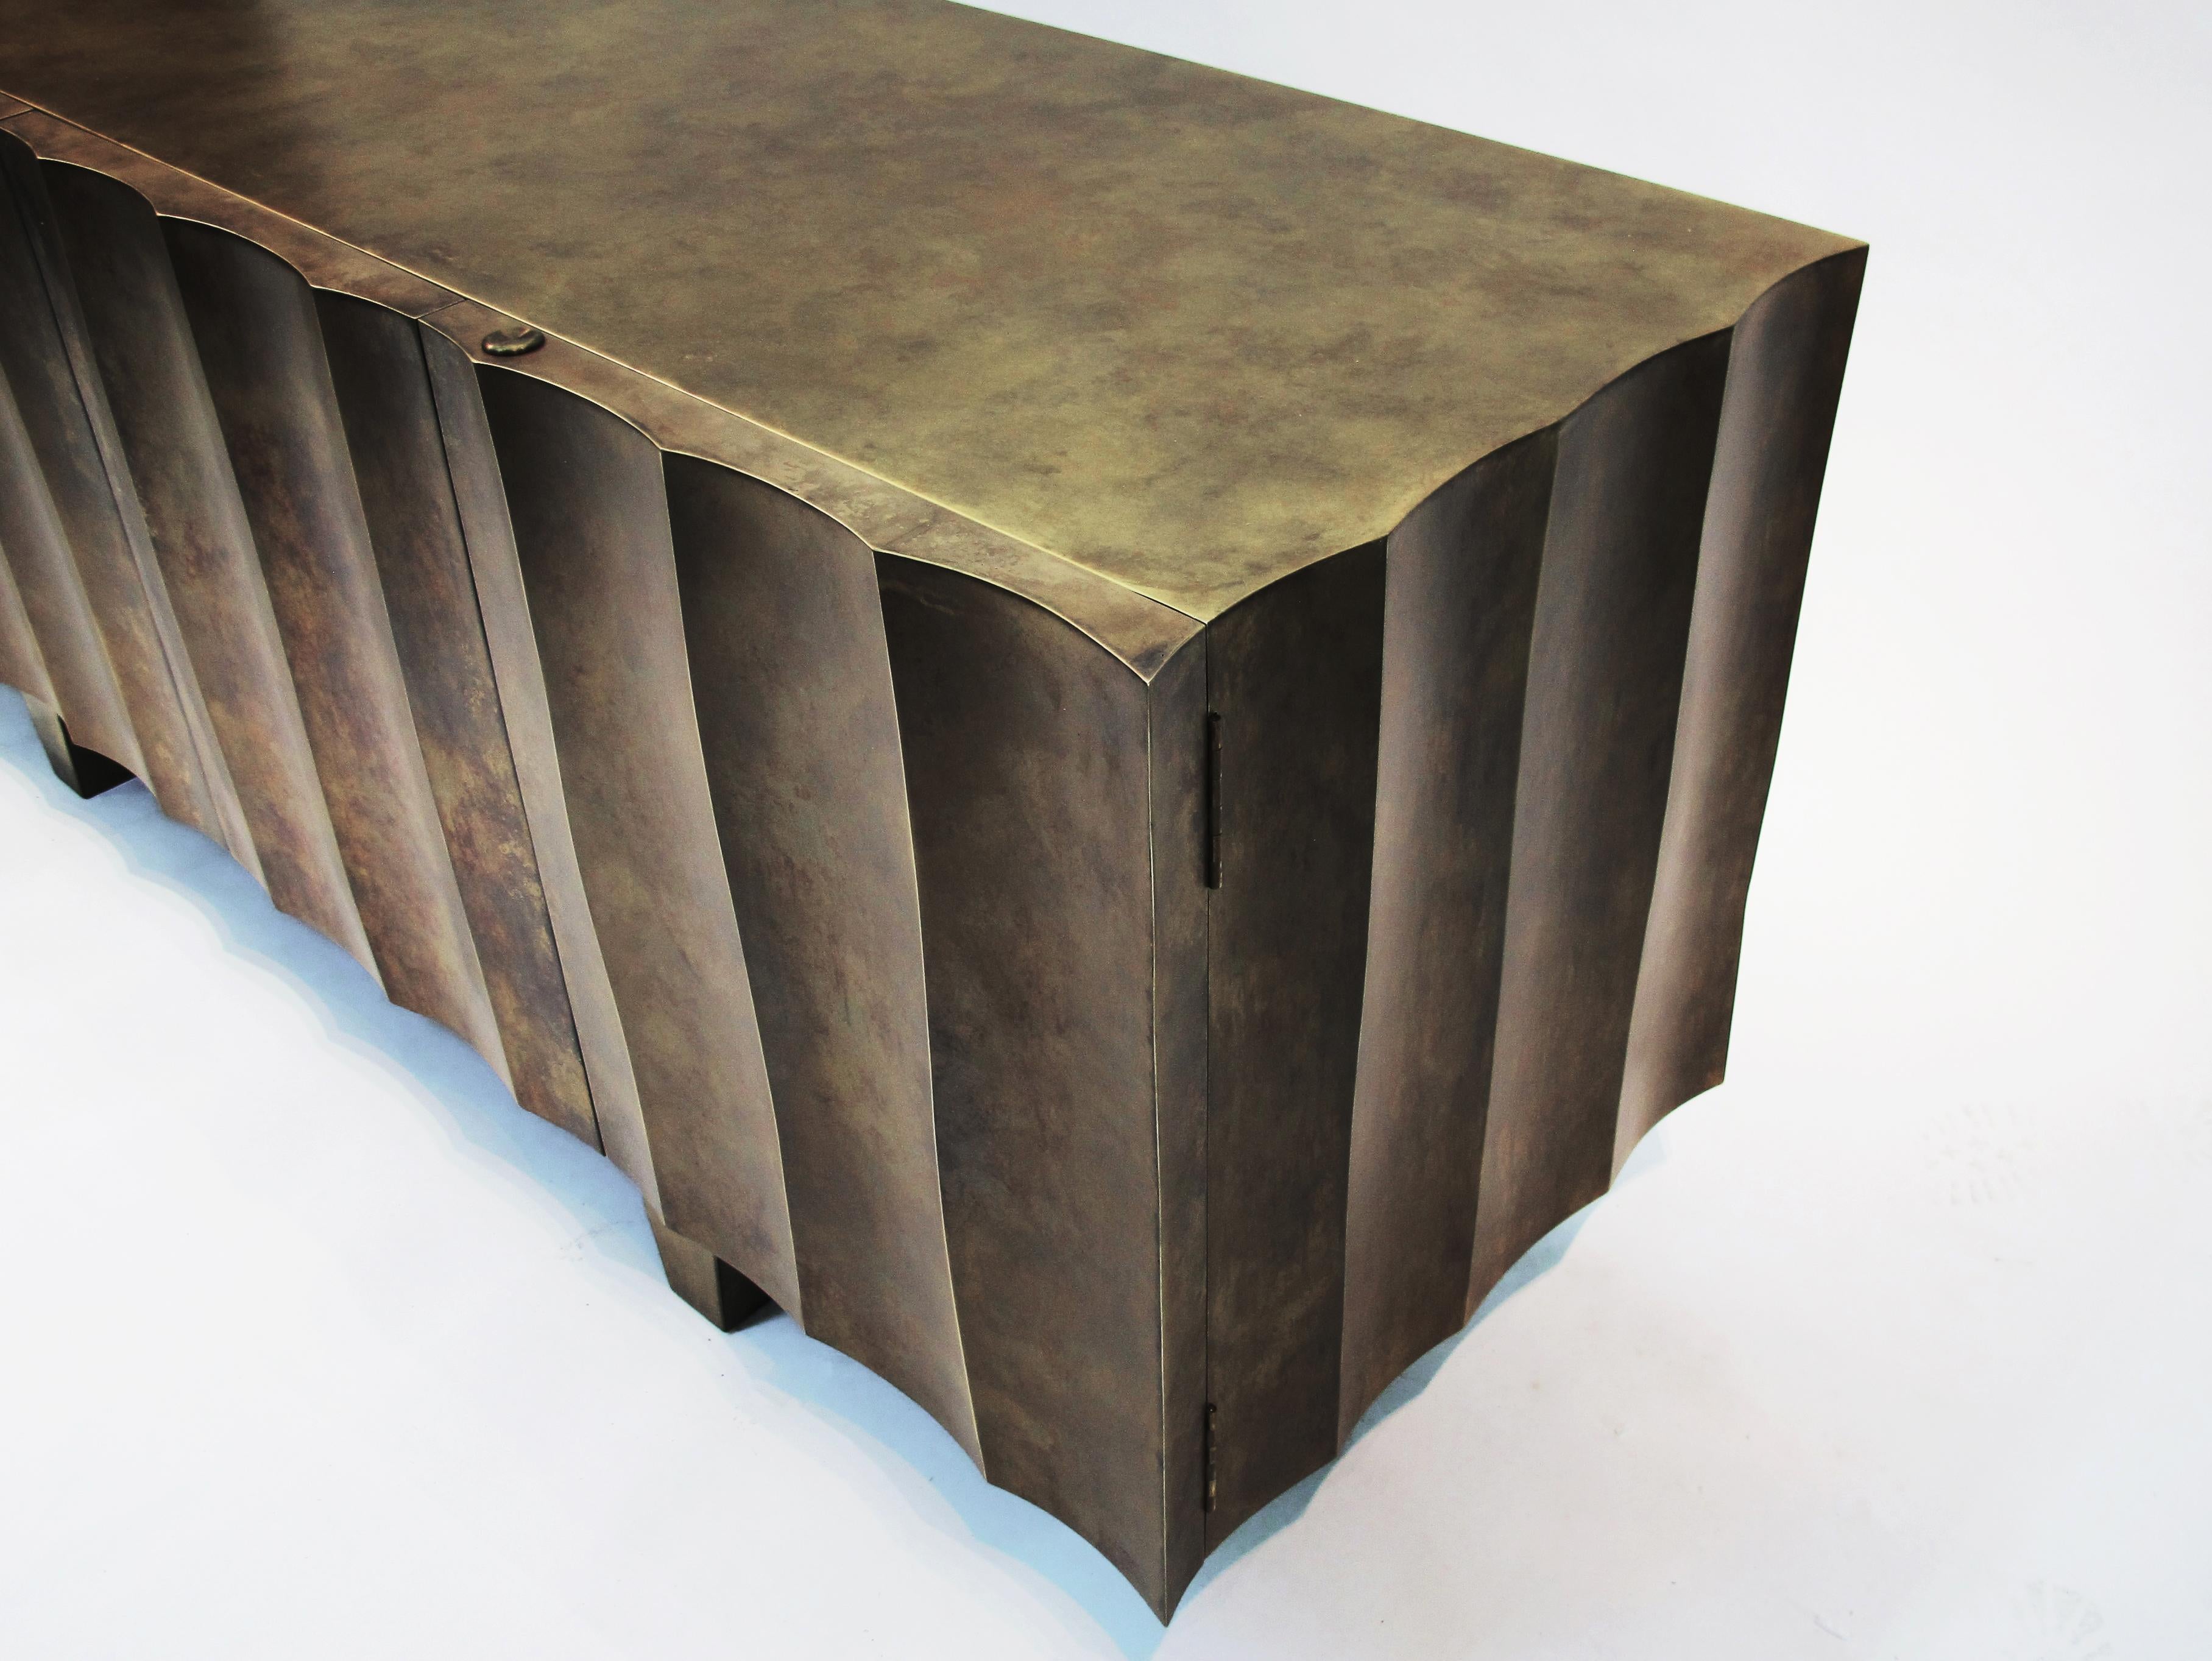 Uluwatsu sideboard- Signed by Stefan Leo
Forged iron, Top marble
Brass, patinated 
200 x 50cm, H:74 cm

Atelier Stefan Leo has a remarkable reputation thanks to its unique furniture designs created with the finest craftsmanship, proving how